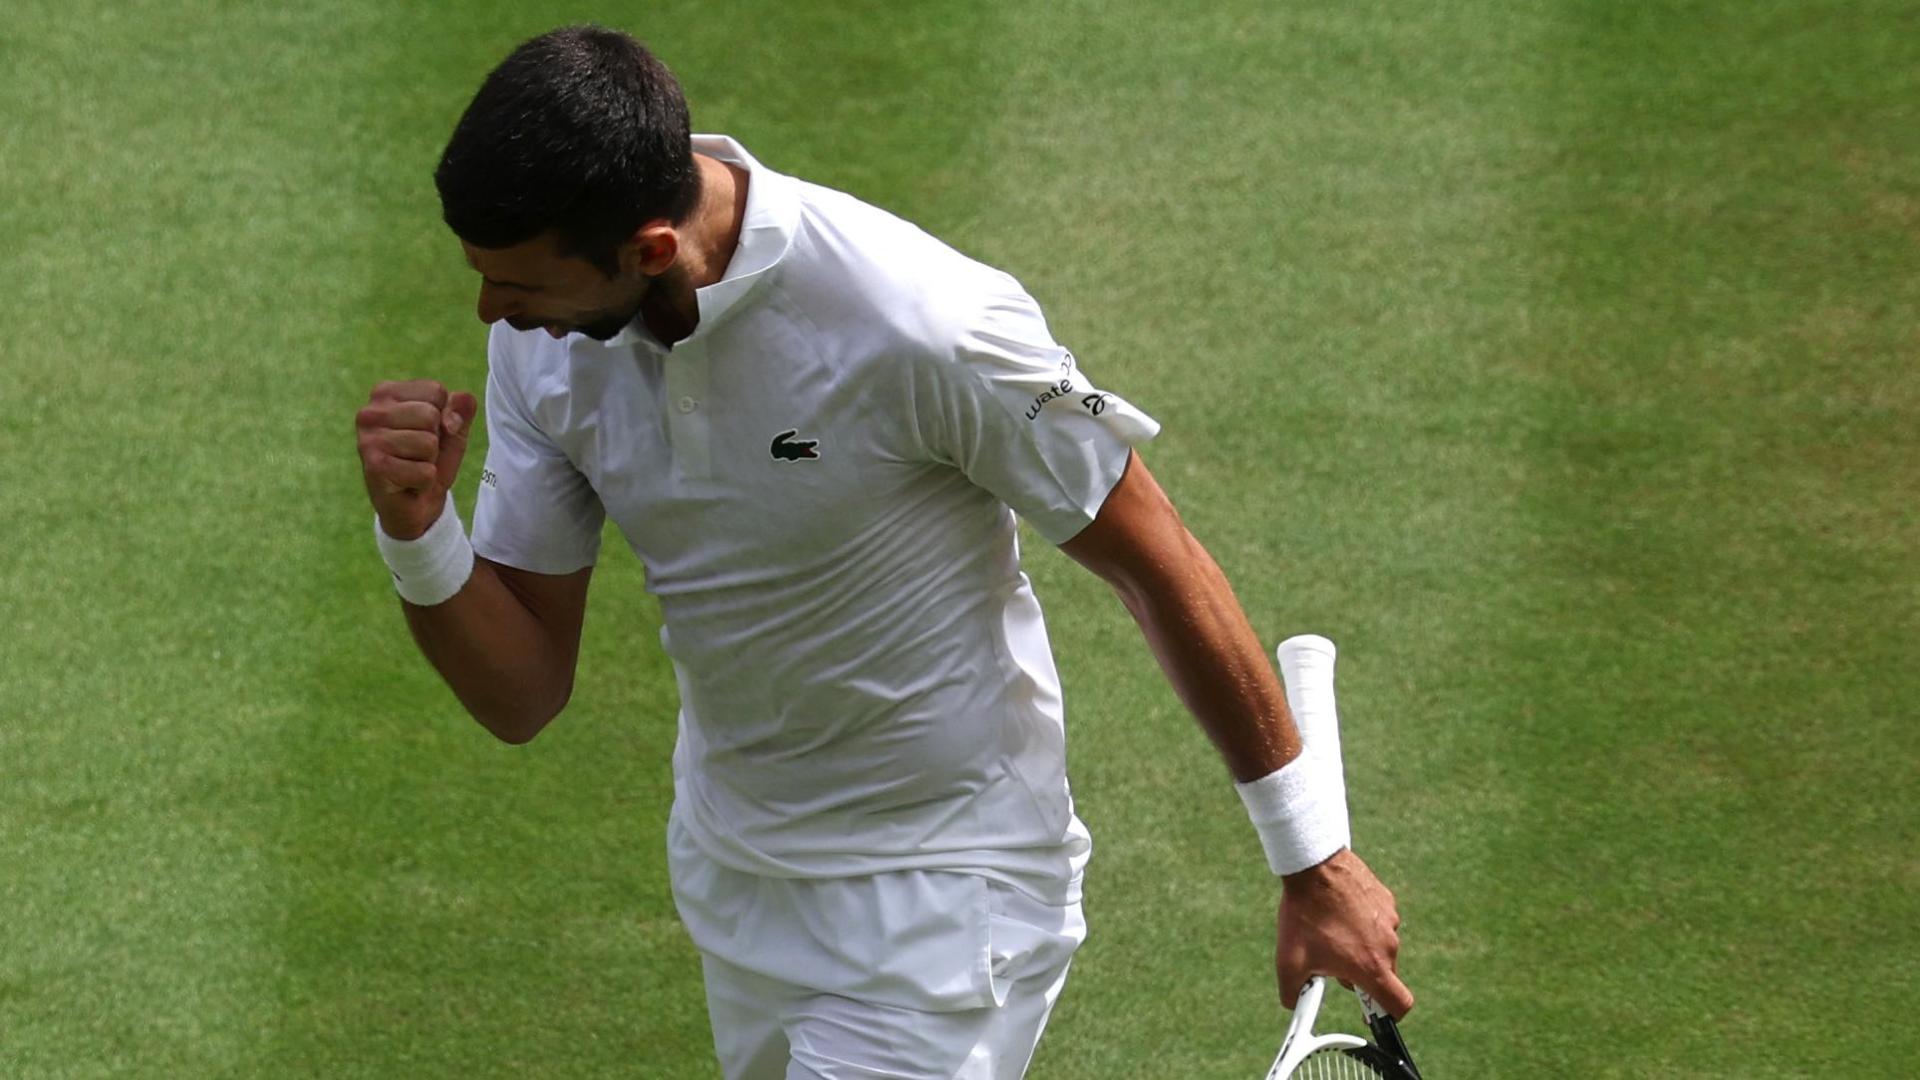 Djokovic takes the first set 6-1 in Wimbledon final - Stream the Video